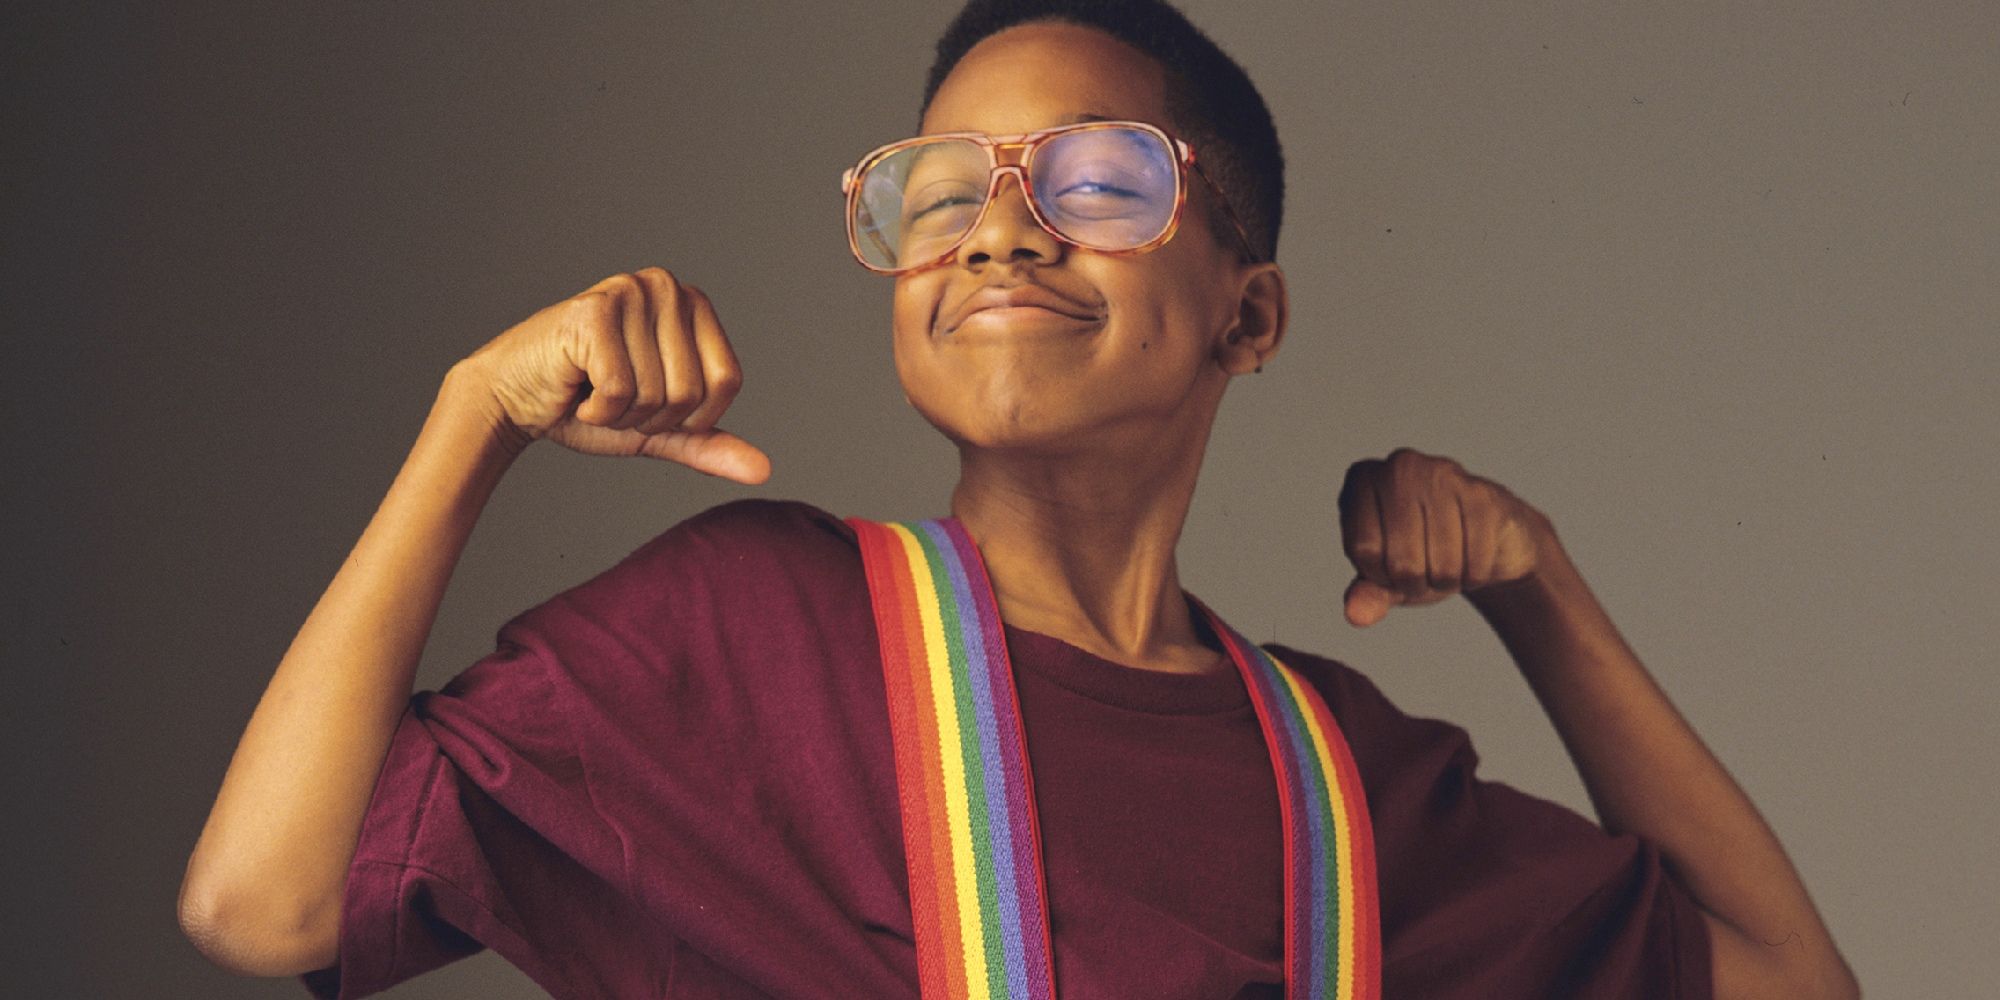 A young Jaleel White in Family Matters as Steve Urkel smiling and flexing his arms